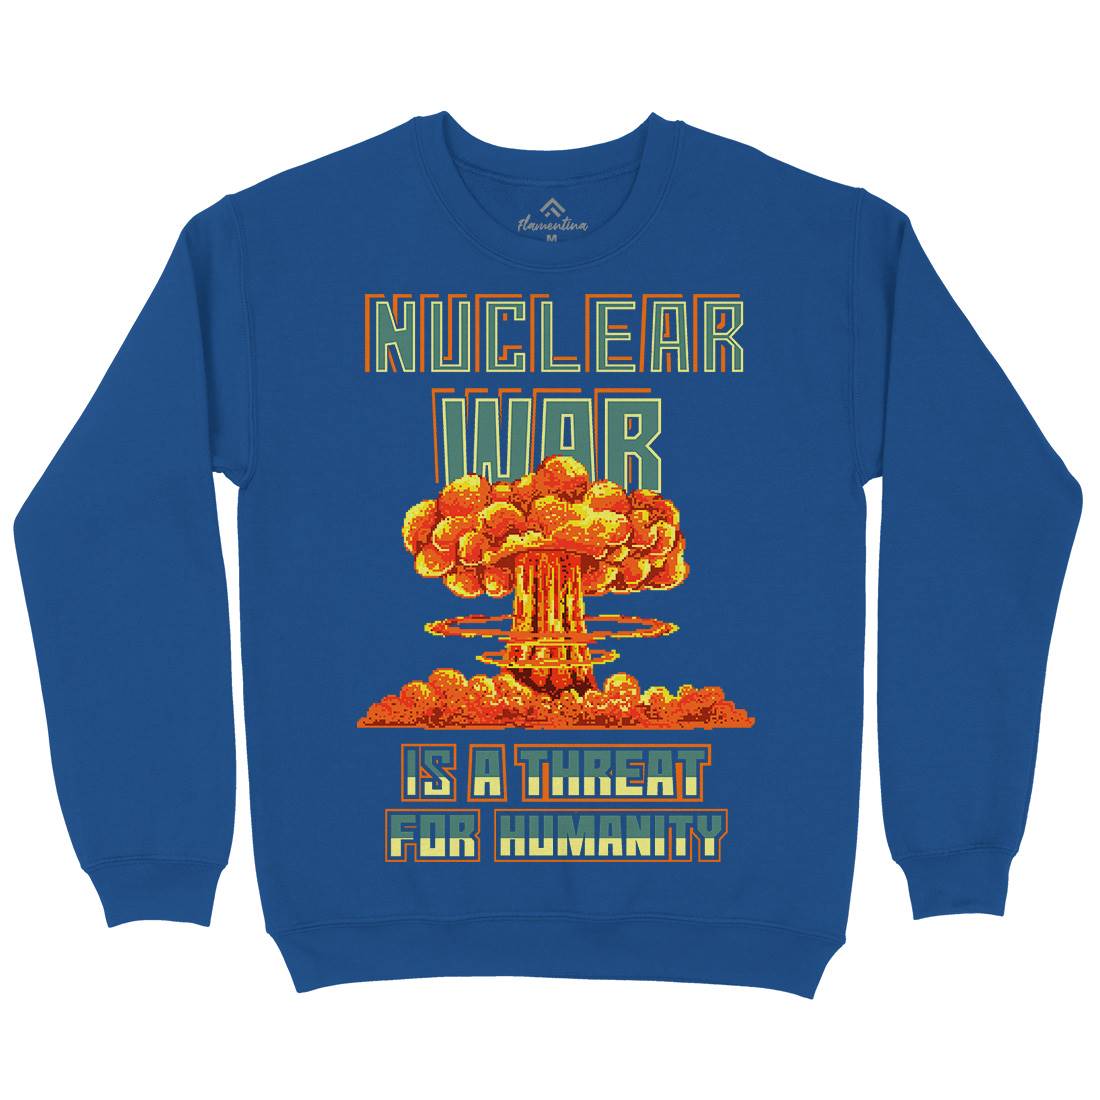 Nuclear War Is A Threat For Humanity Mens Crew Neck Sweatshirt Army B941